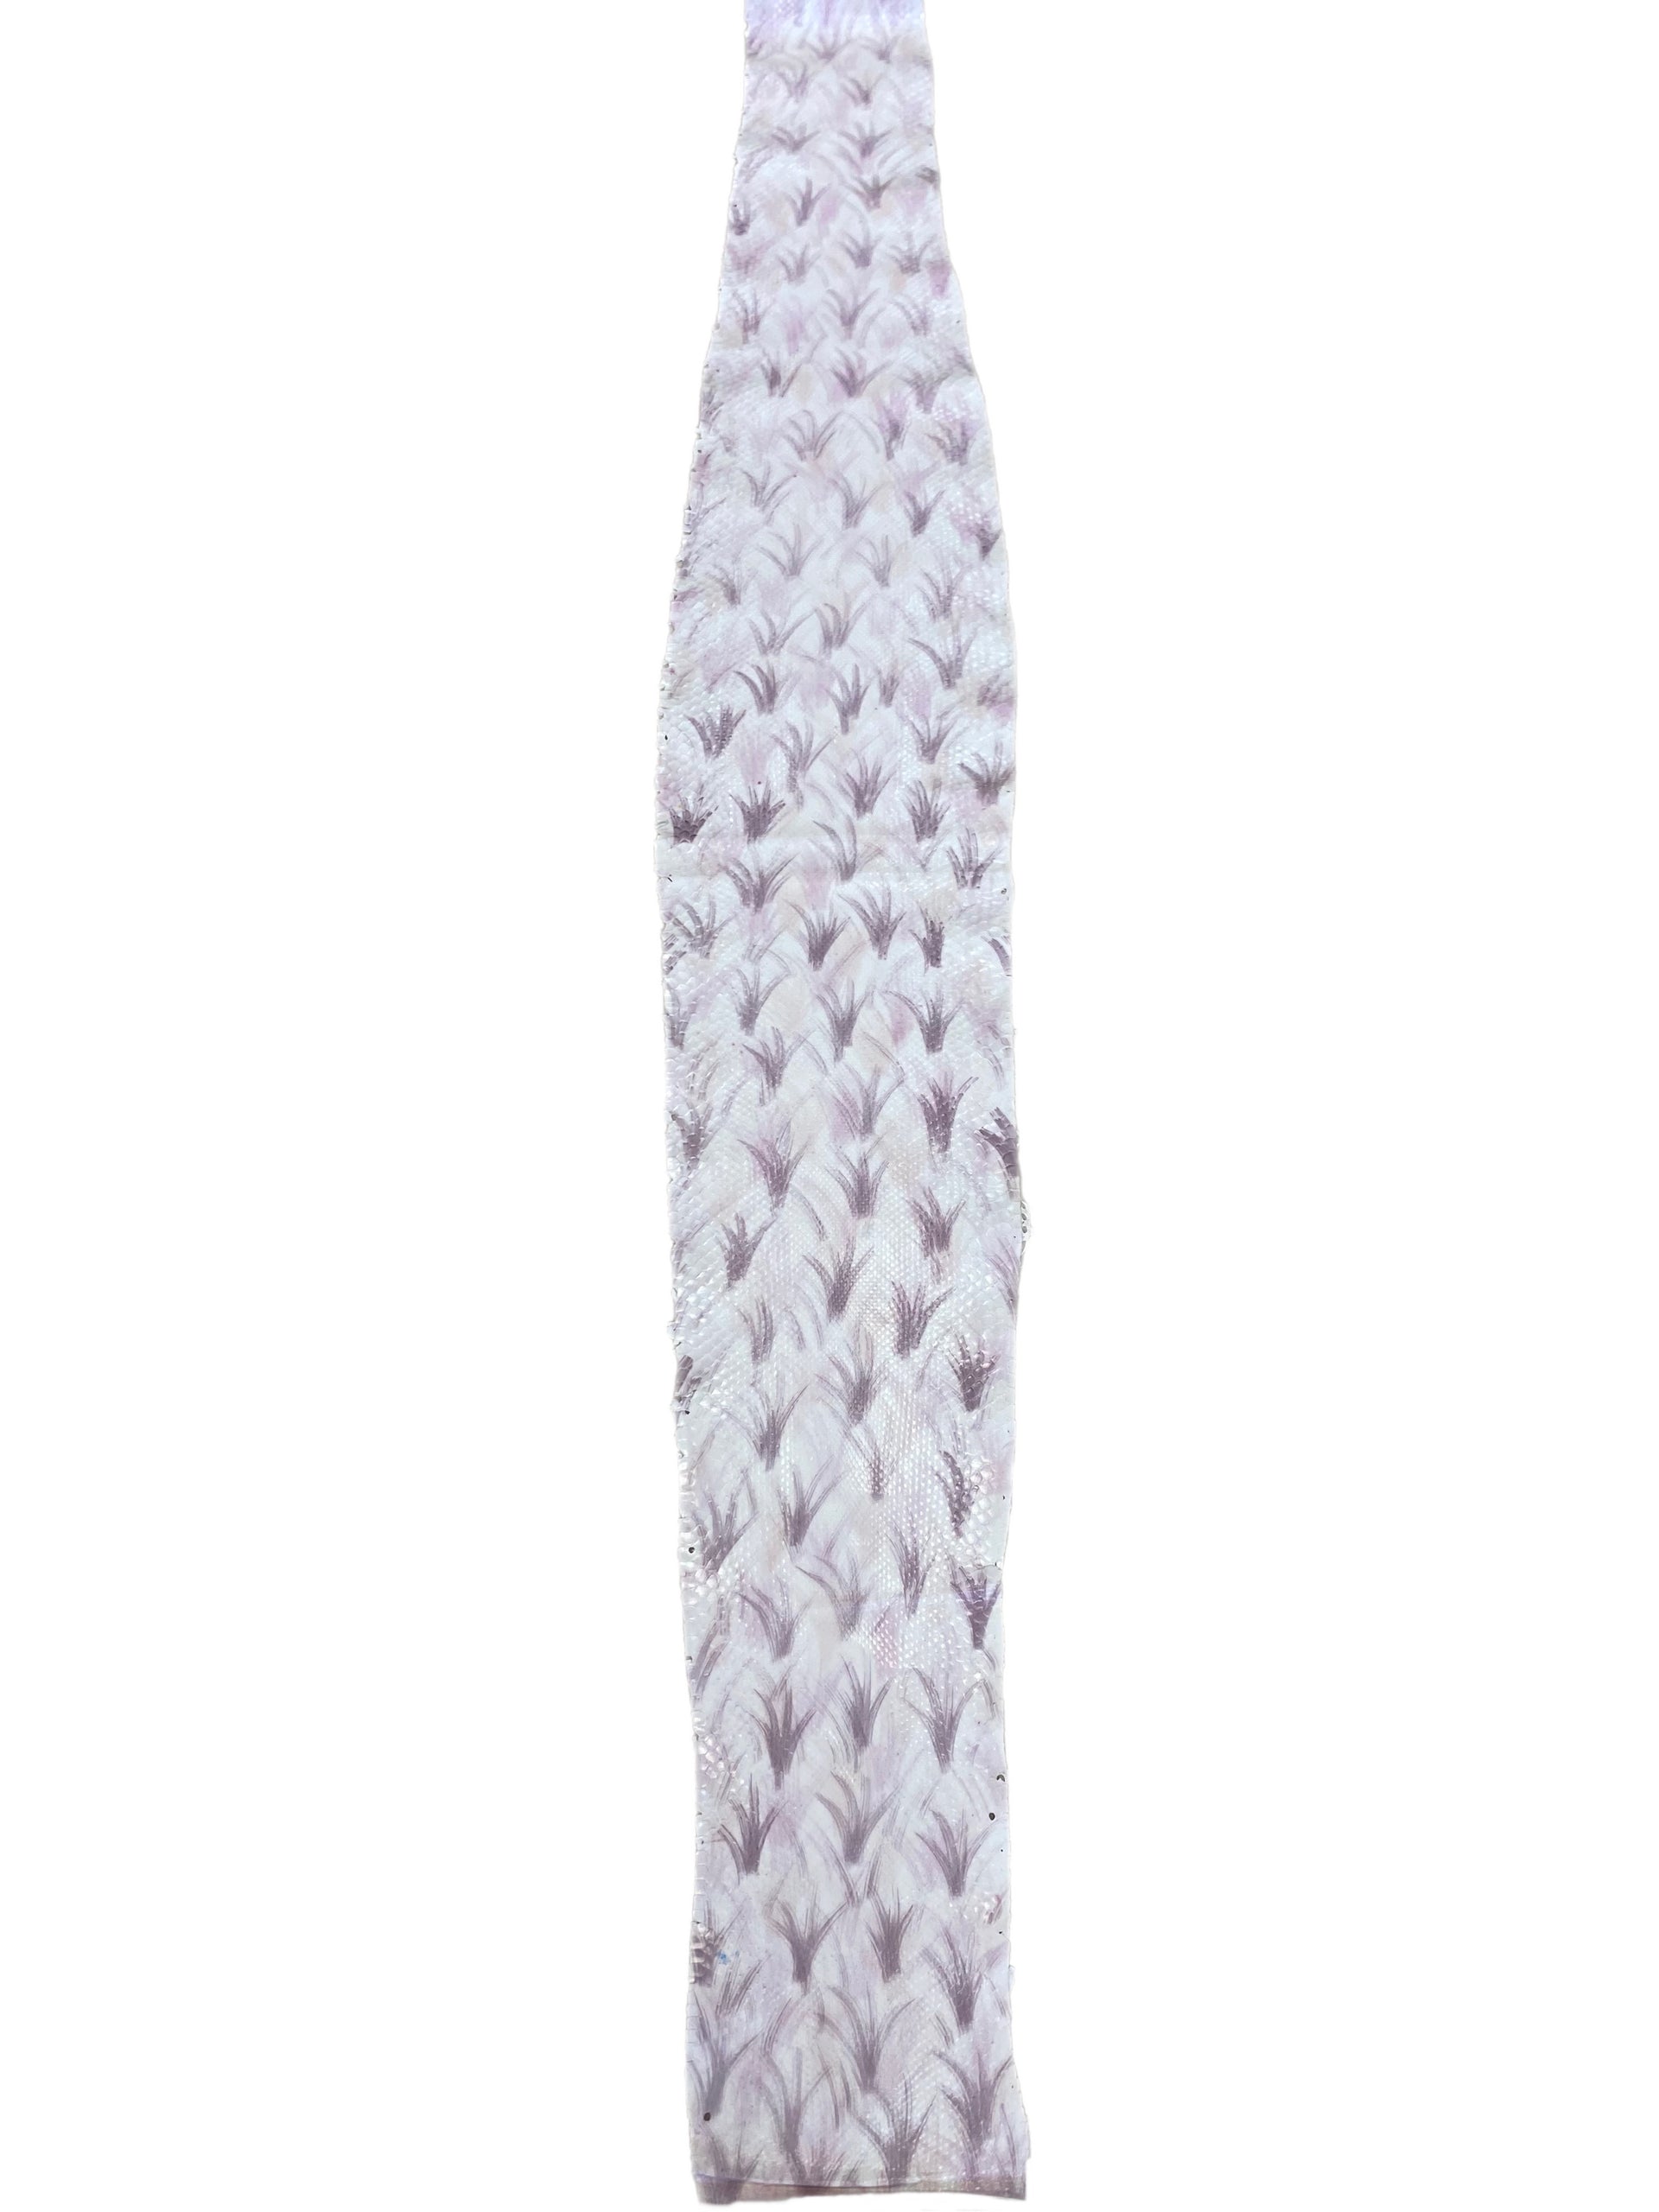 1.95 M Front Cut White and Lavender Glazed Python Leather